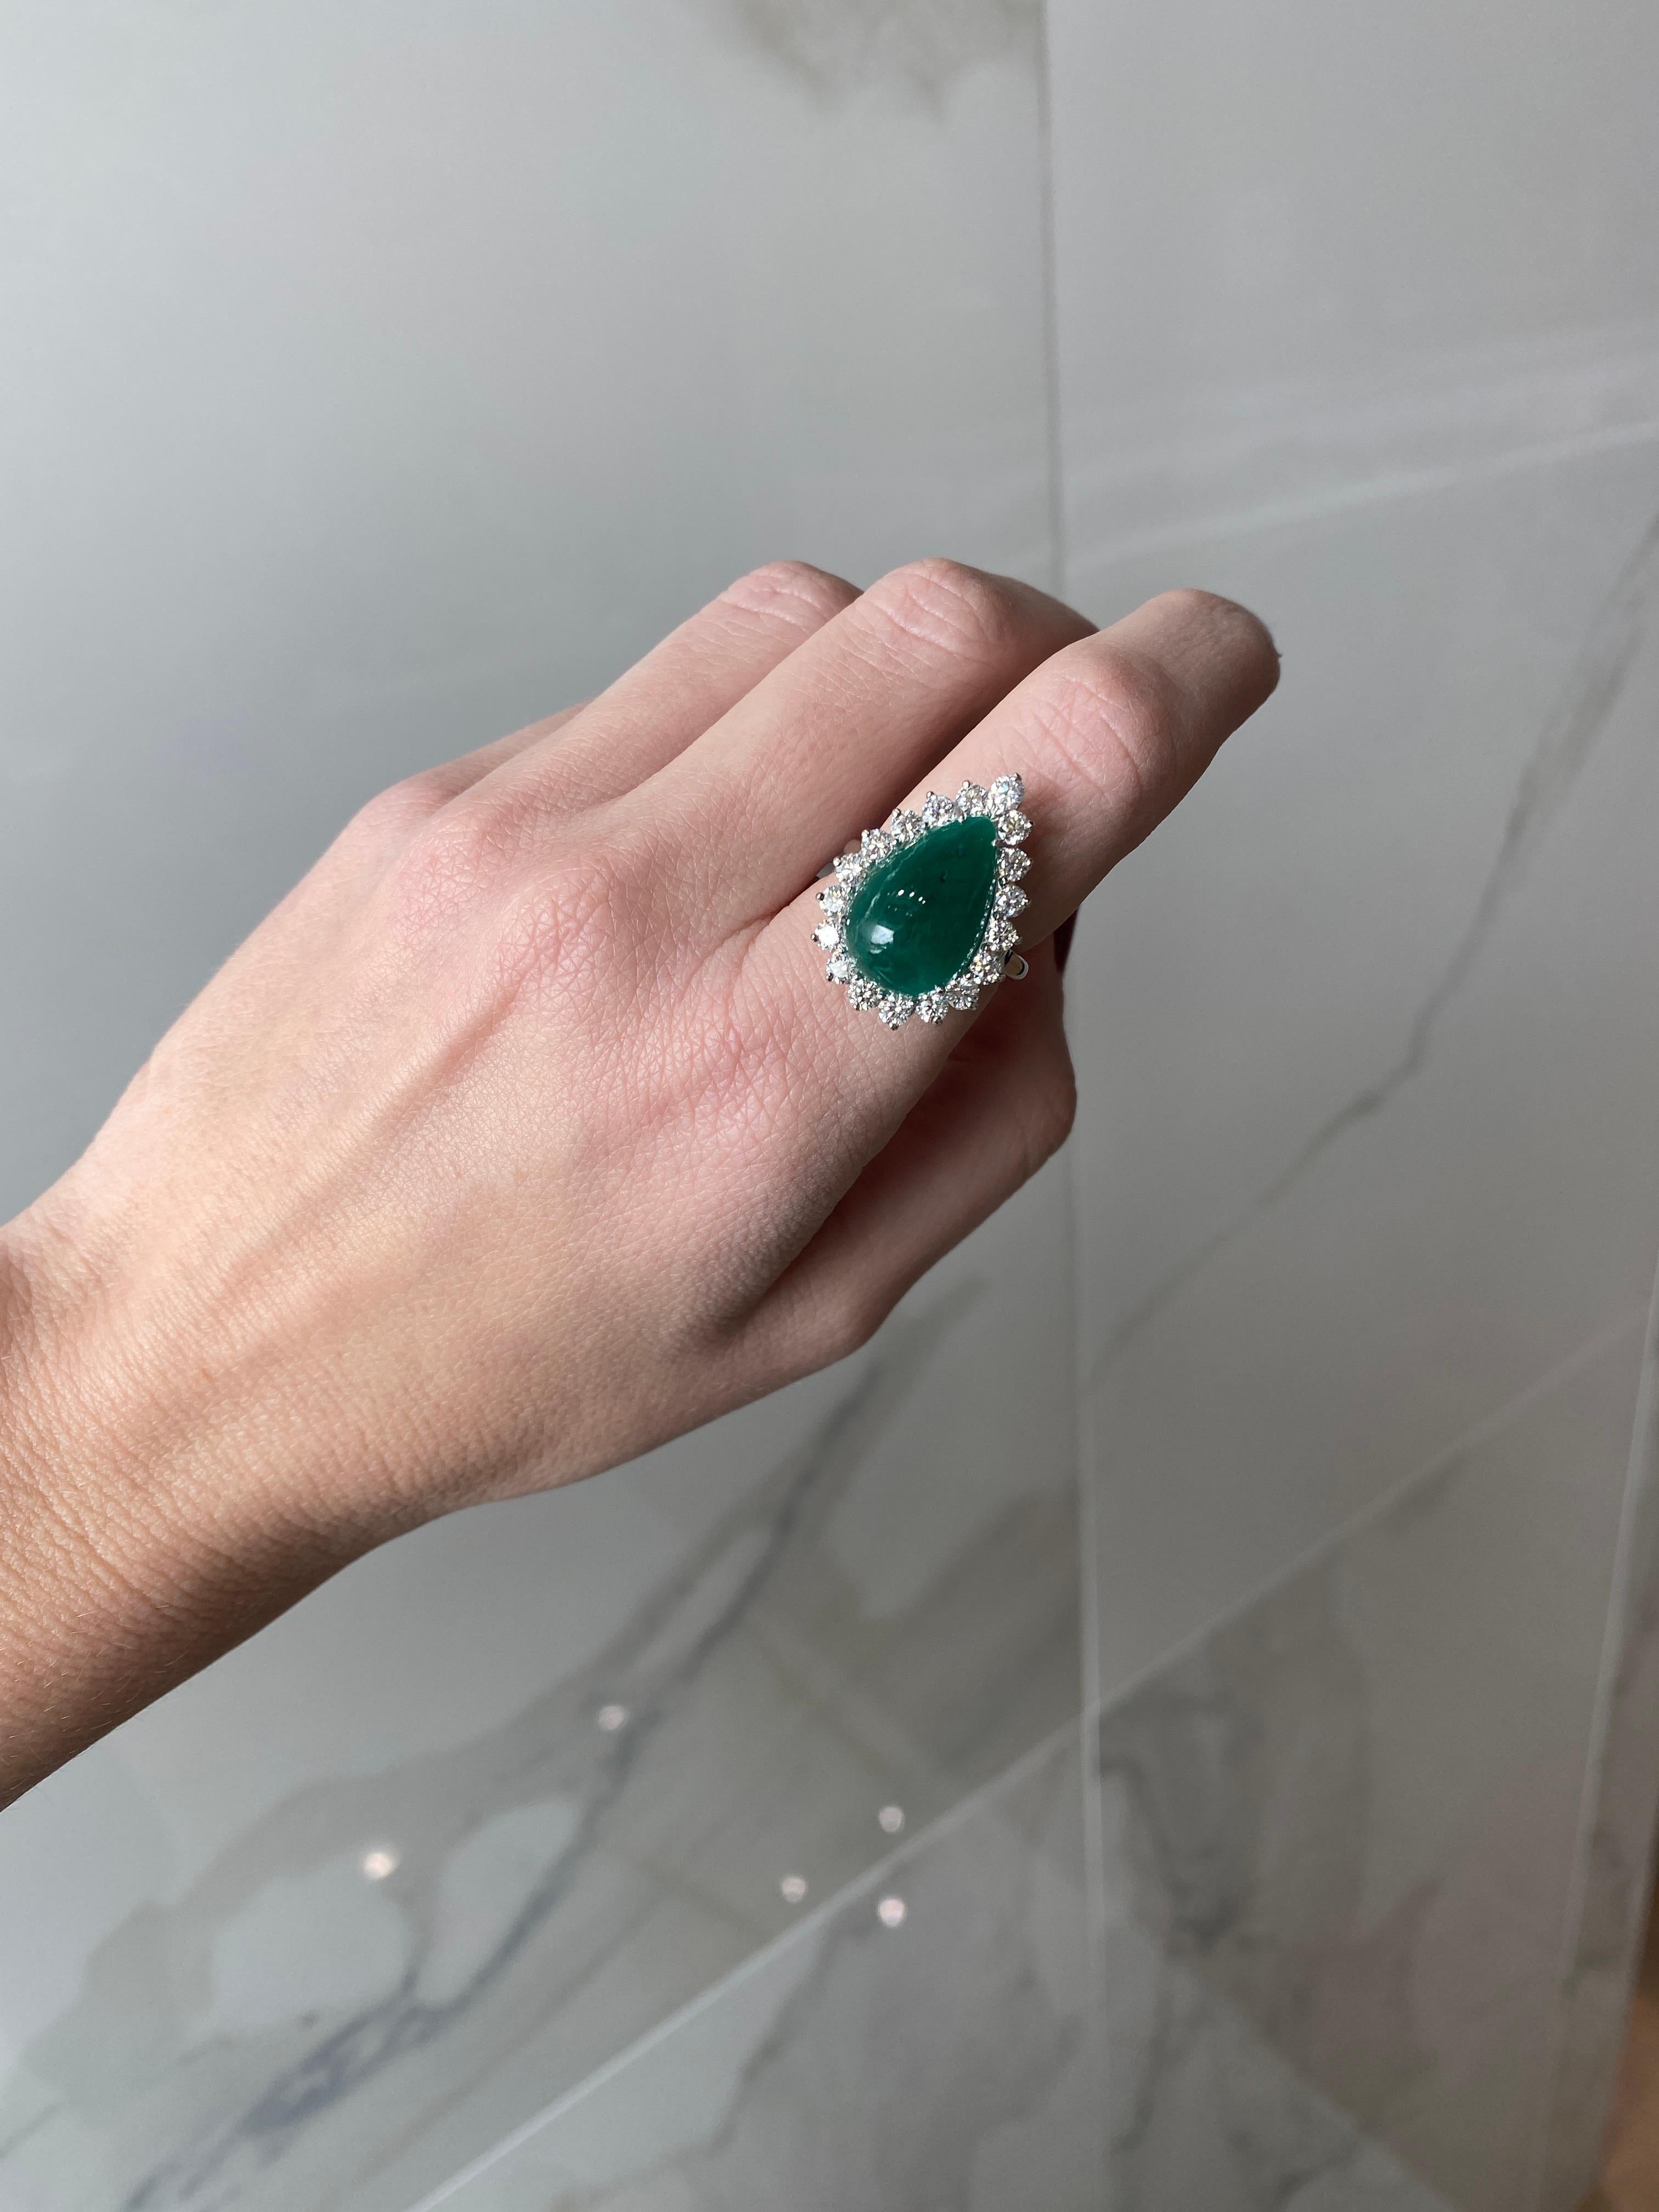 GIA Certified 7.98 Carat Pear Shaped Emerald Cabochon & Diamond Ring For Sale 10